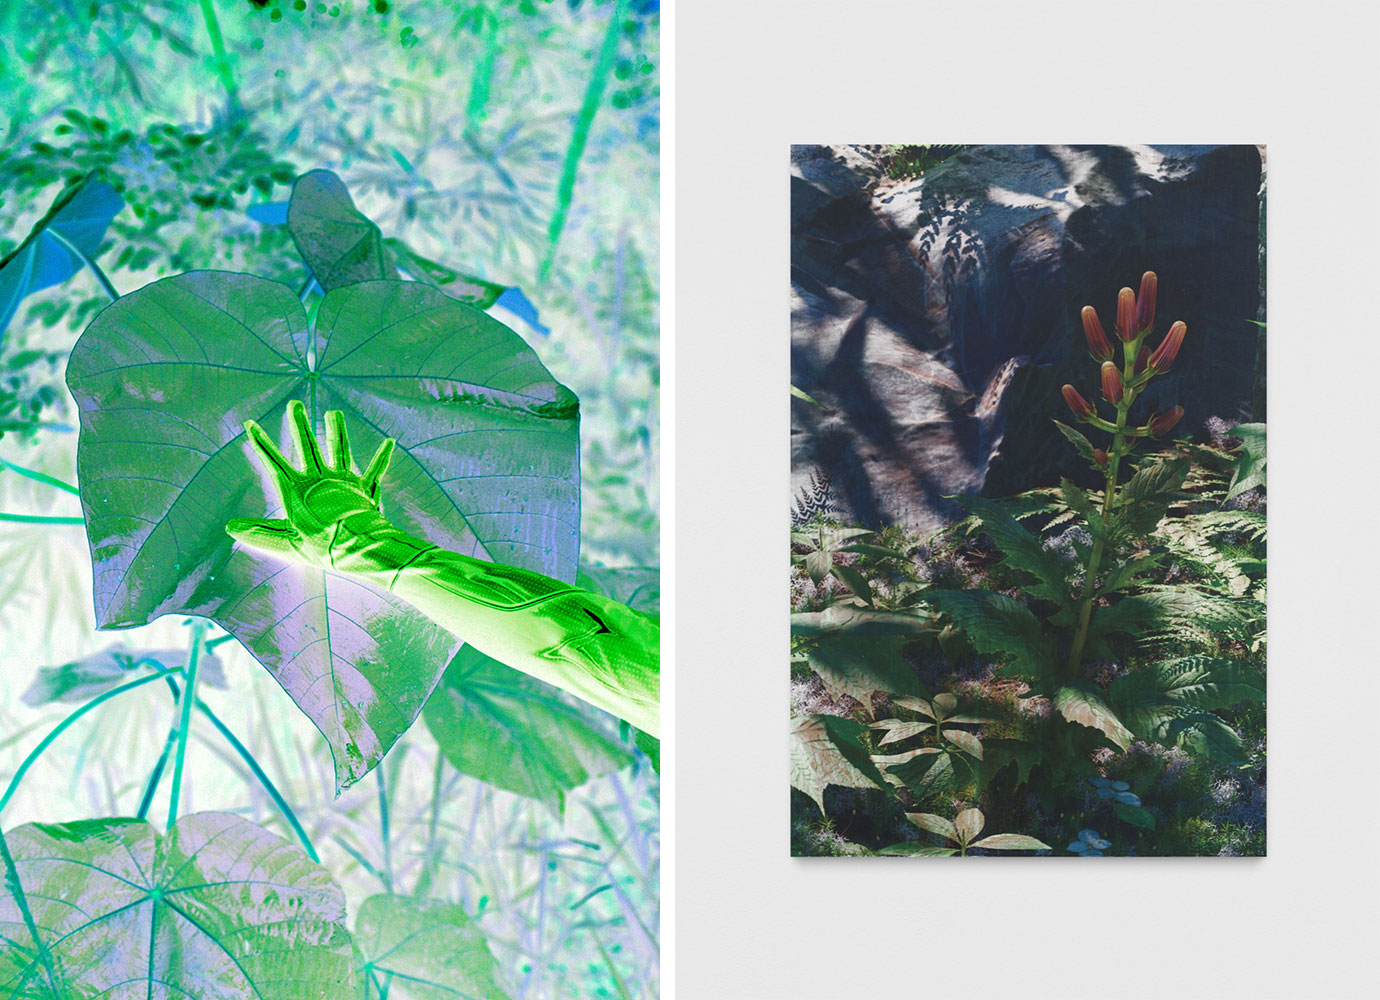 Left: Patricia Dominguez, Matrix Vegetal; comparto mi espíritu con tu flor, 2021analogue photograph on Hahnemühle Ultra Rag Smooth 305g paper, framed with rounded white wooden frame and UV antireflective glass, 100 x 66 x 3 cm. Courtesy the artist & The RYDERRight: Timur Si-Qin, Untitled (natural origin, 9), 2023, Custom aluminum dibond copper panel, gesso, UV-print, 99 x 66 x 3.2 cm. Courtesy the artist & Société, Berlin 